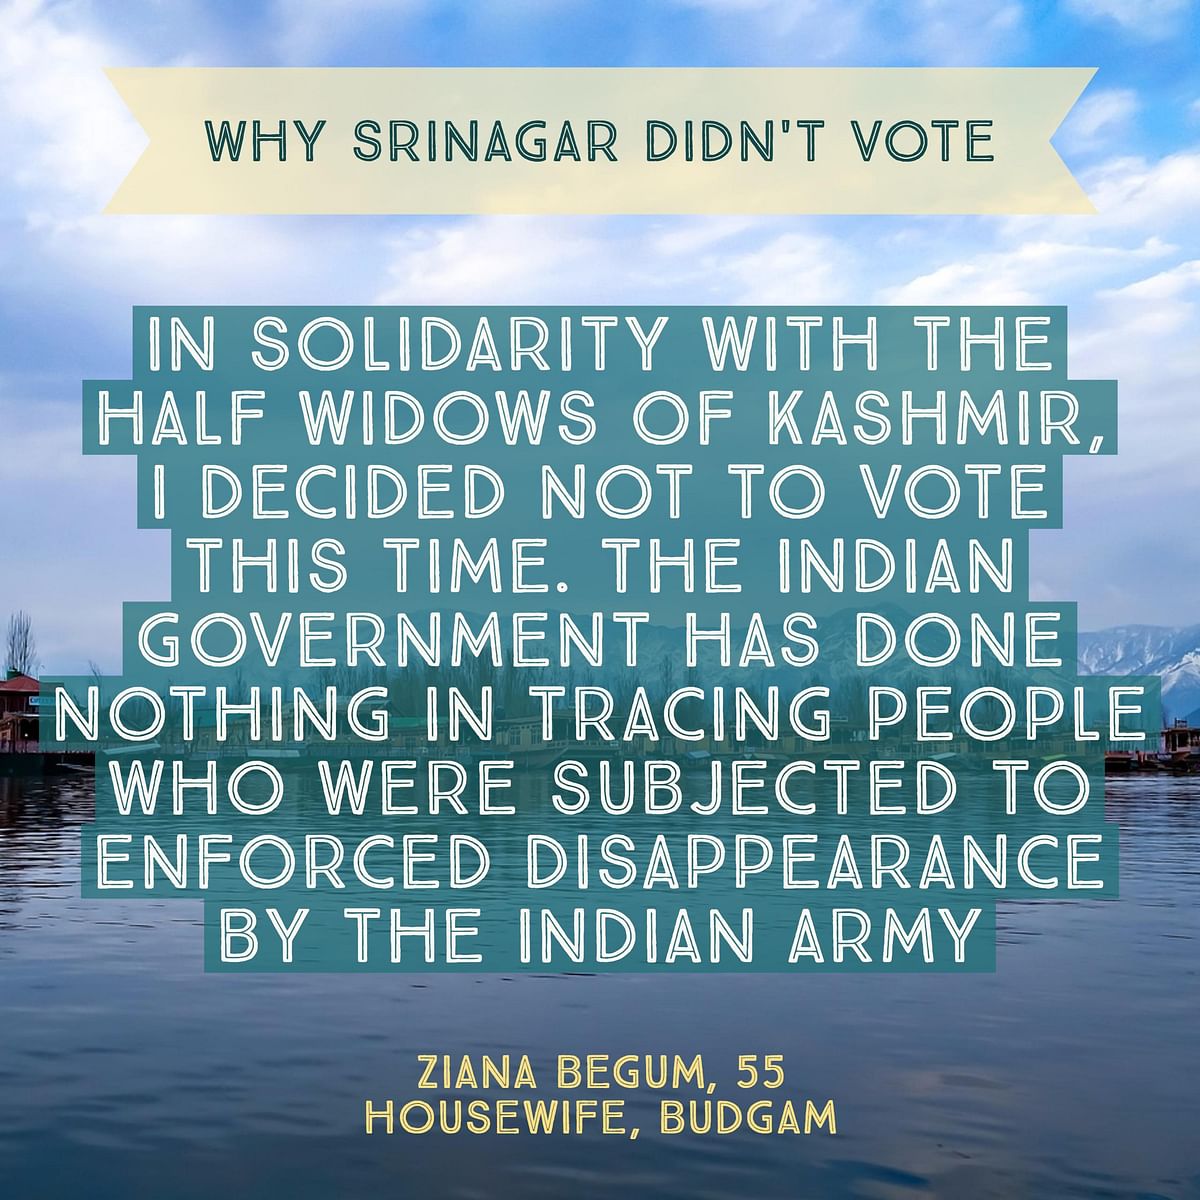 The Srinagar bypoll saw an abysmal 6.5% turnout, the worst poll figure in 30 years of the state’s electoral history.